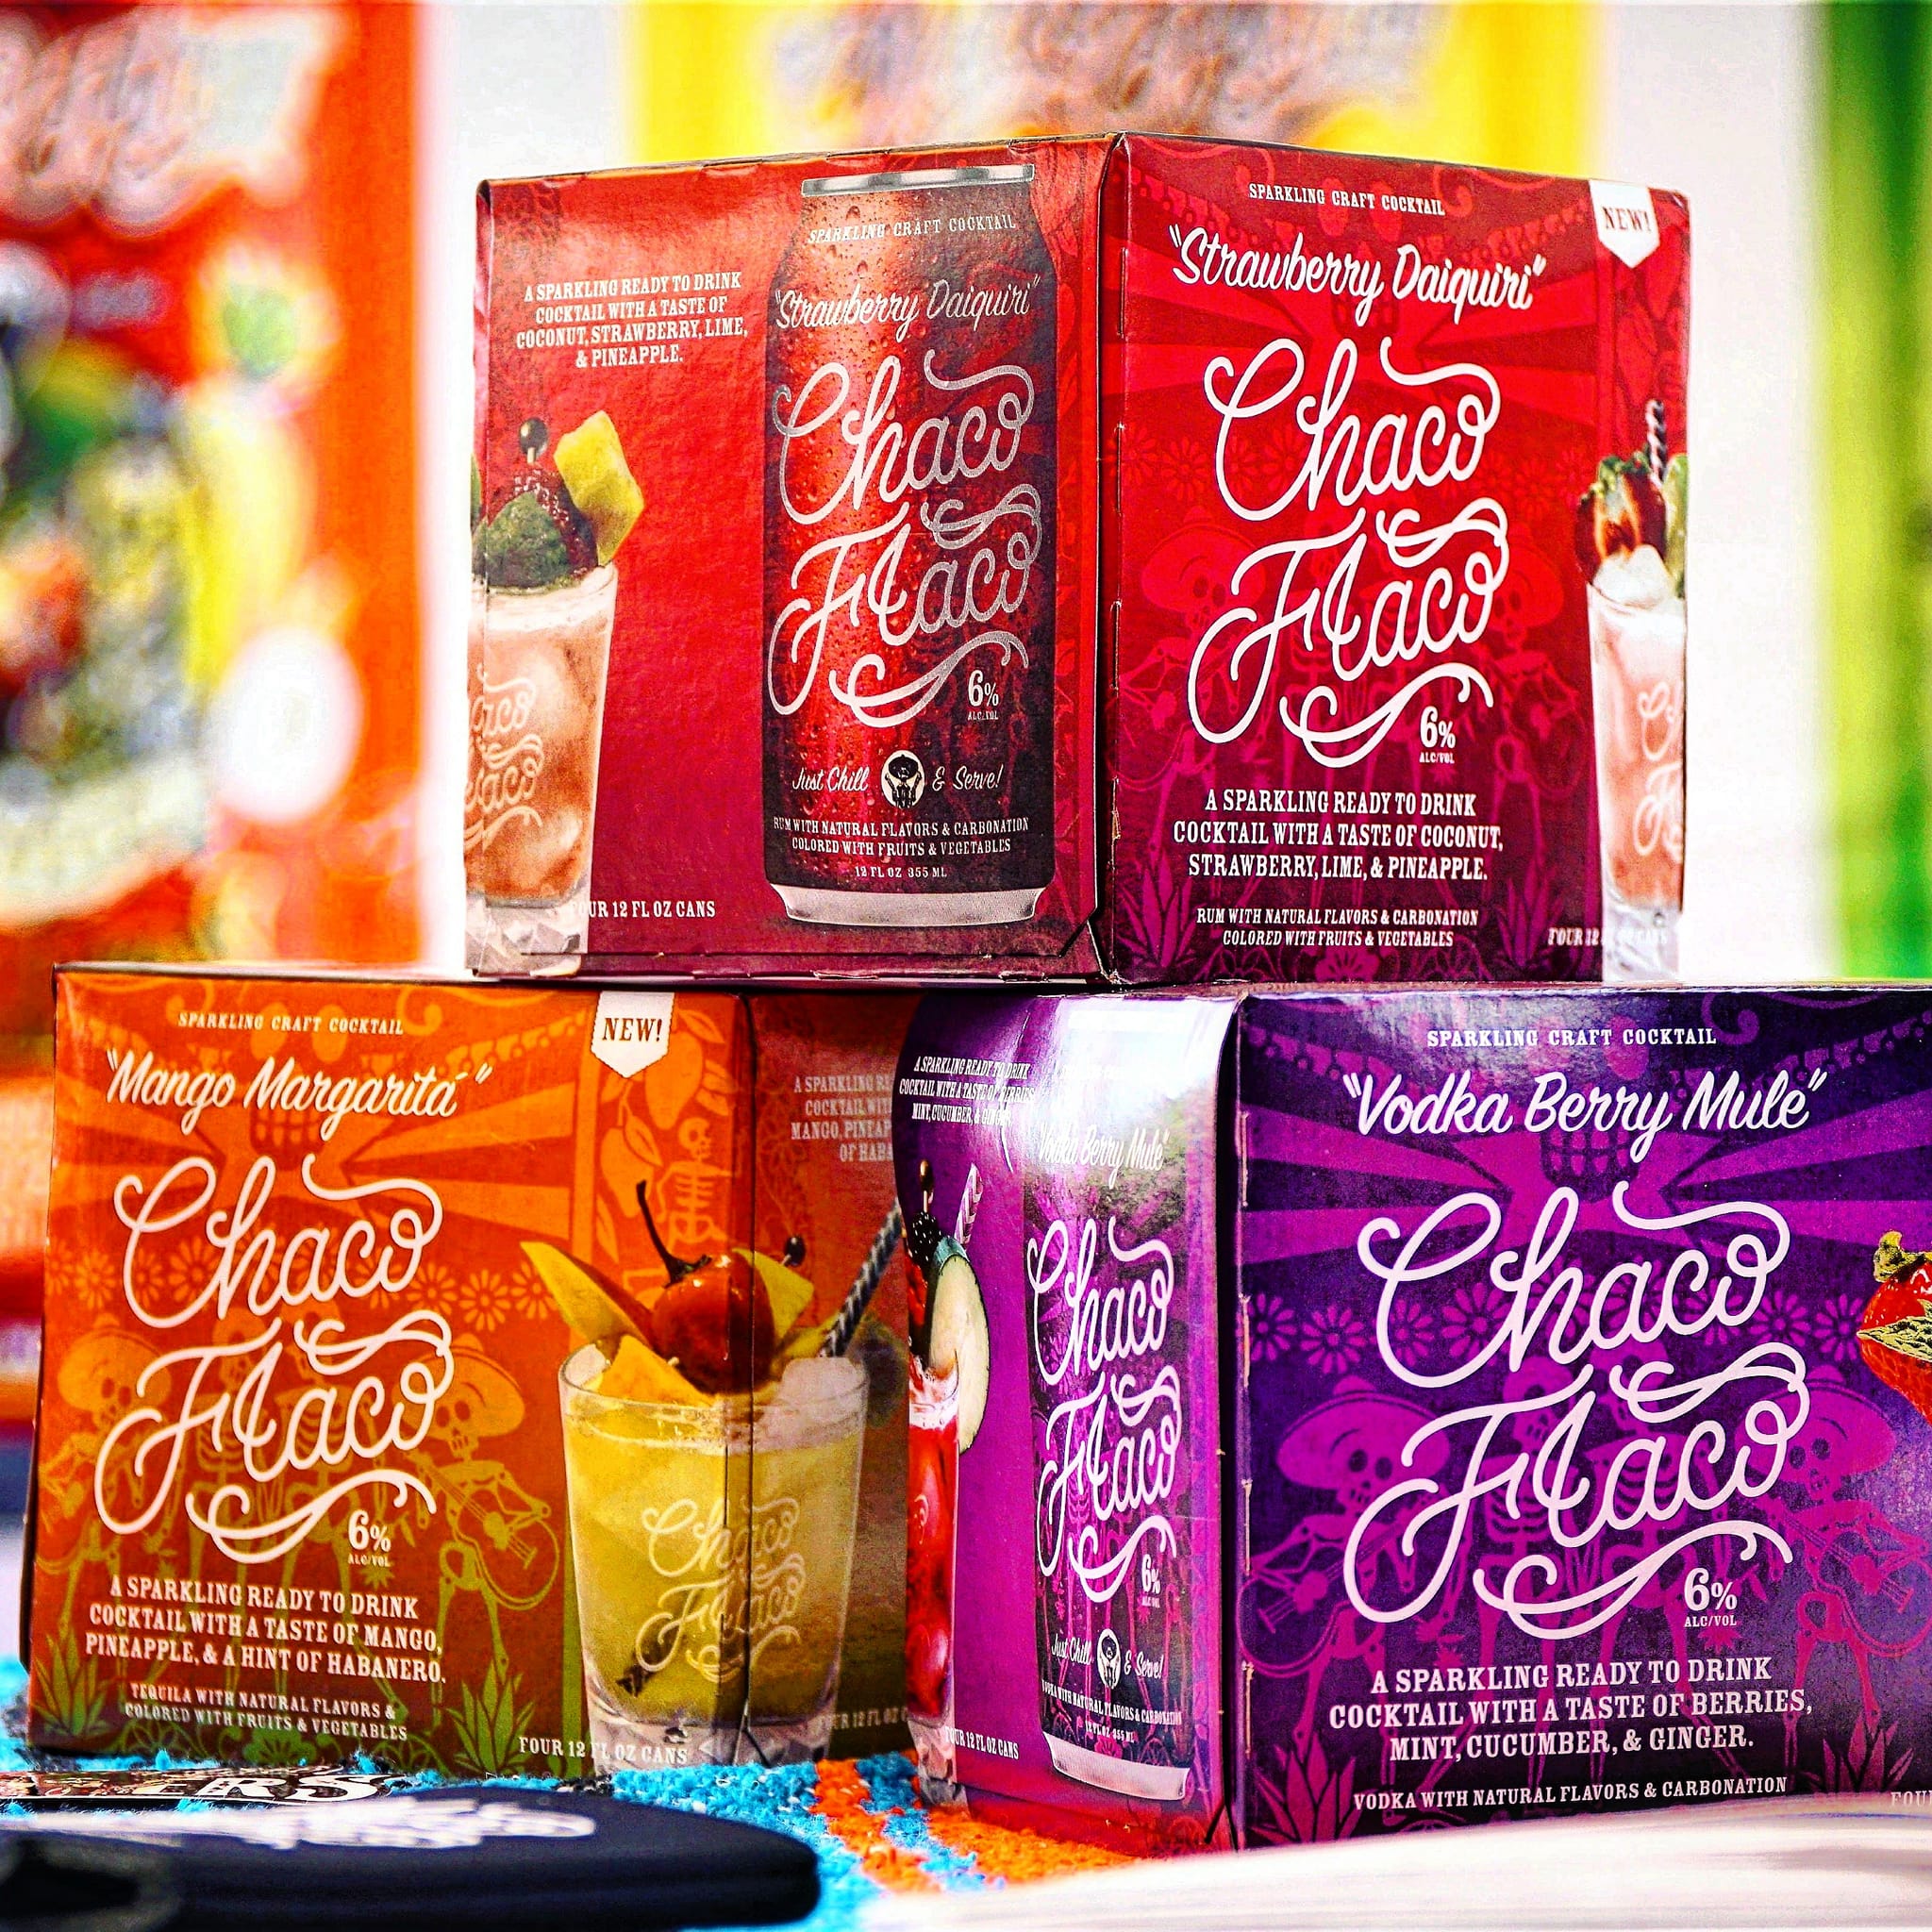 Best Summer Snacks to go with Canned Cocktails - Chaco Flaco